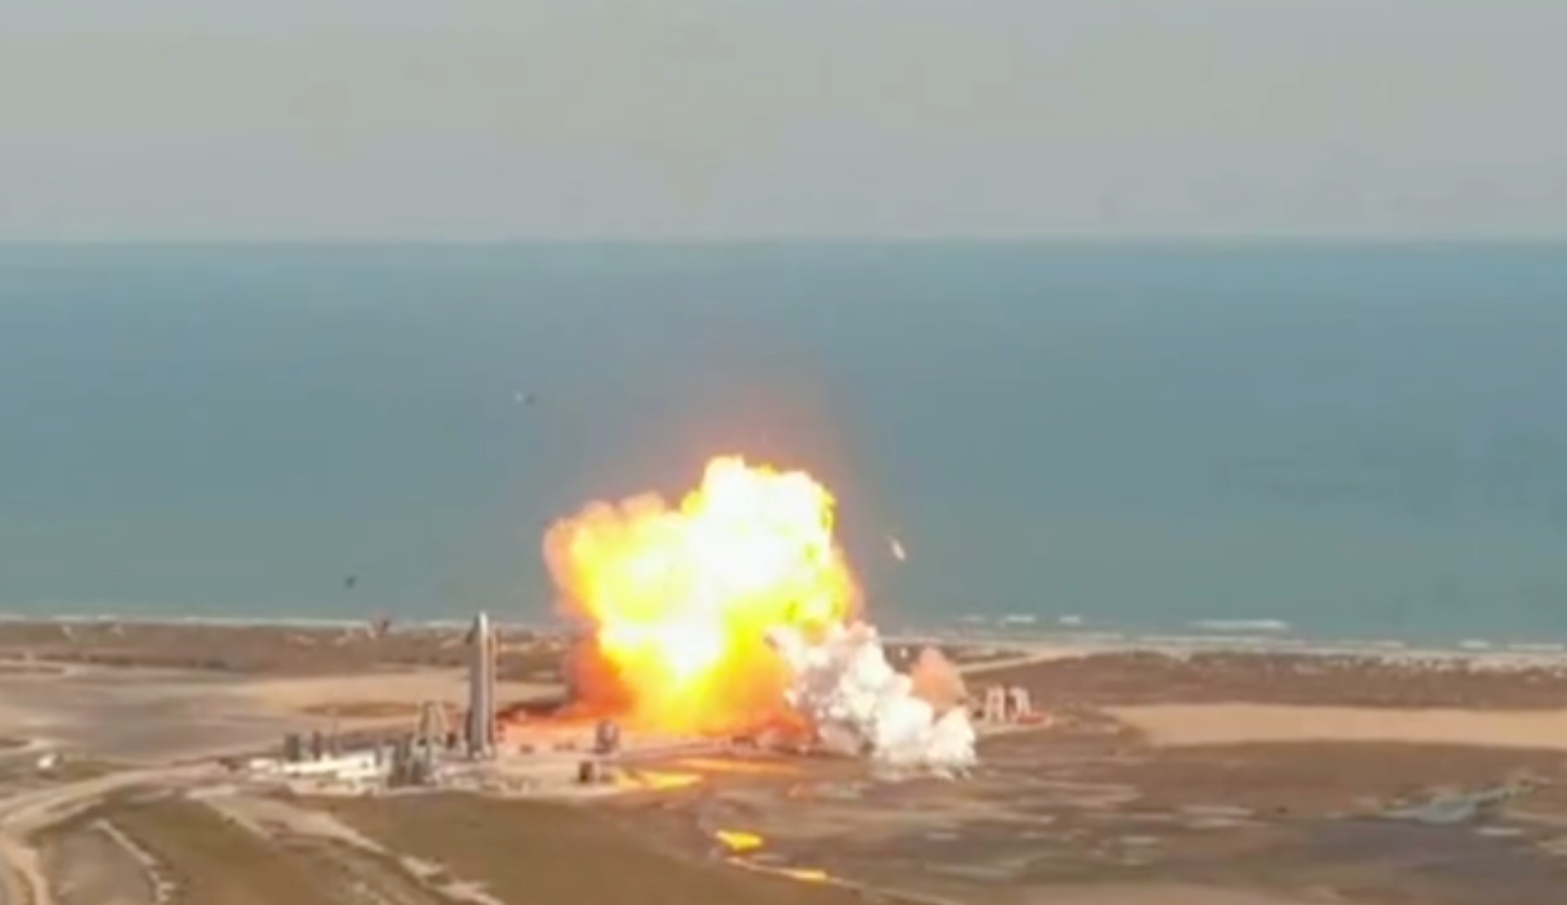 The SN9 Starship prototype exploding during a failed landing on February 2, 2021.  (Image: SpaceX)